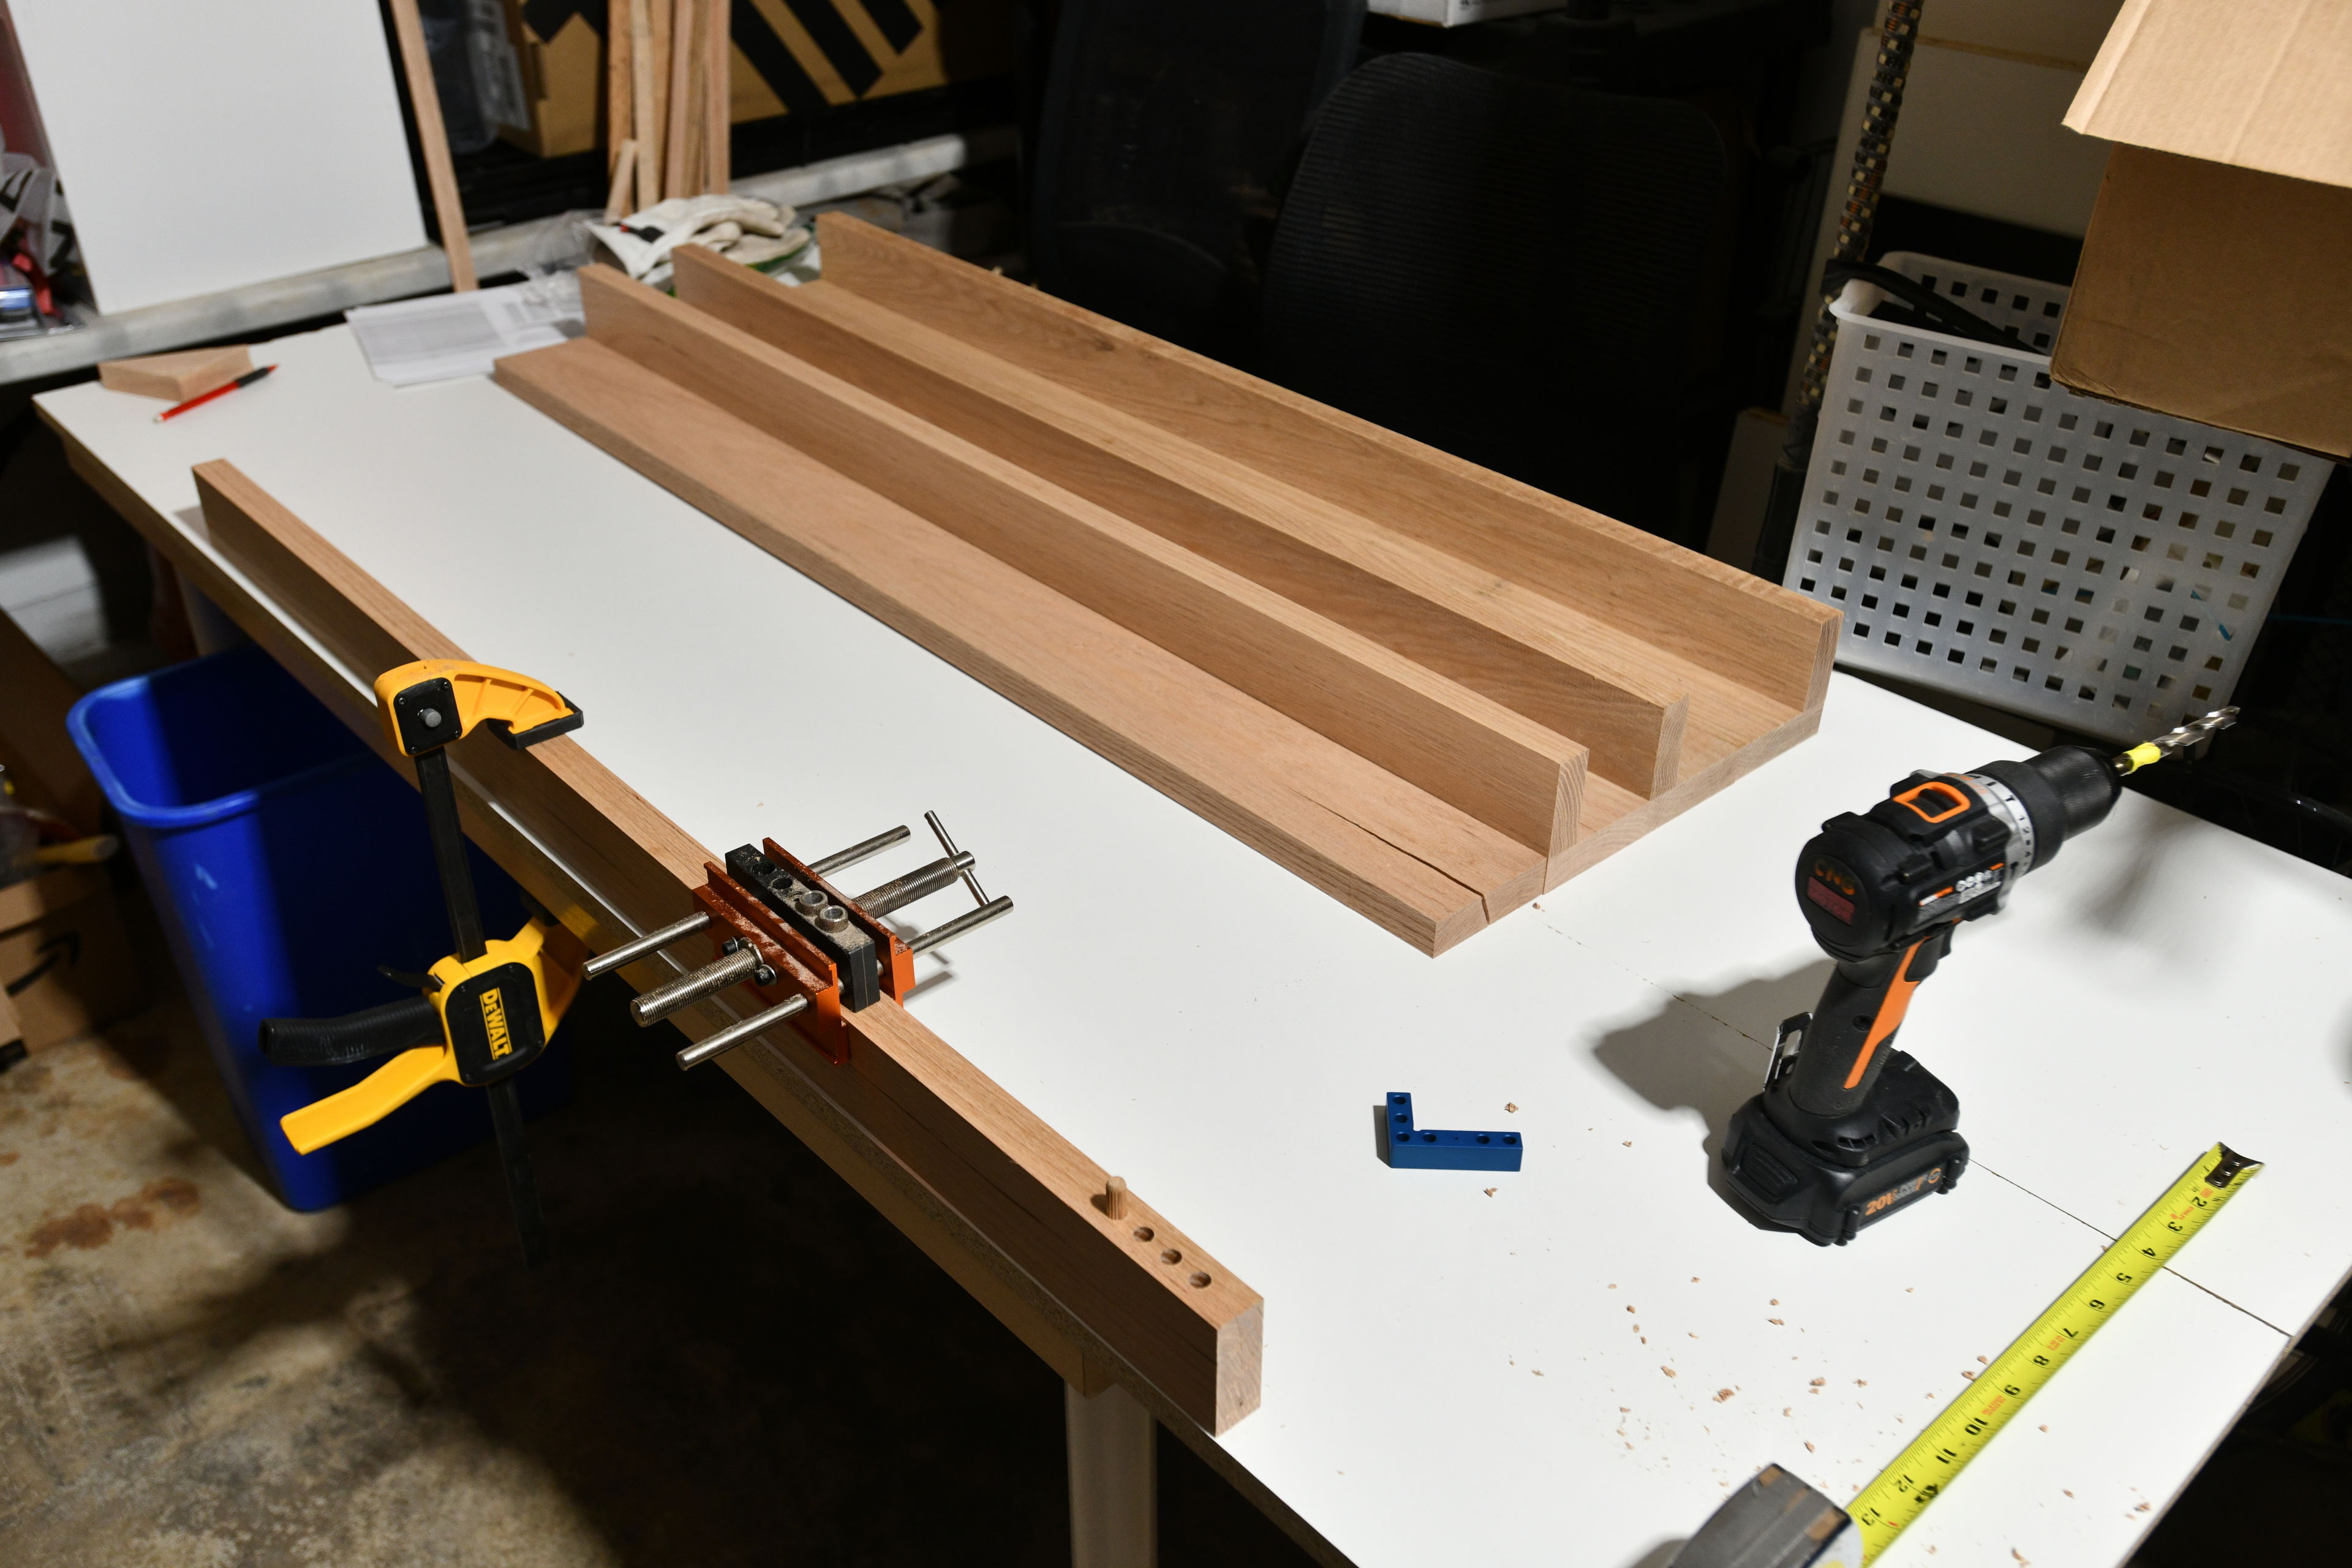 I switched from my original idea of using 4 inch square posts as legs to using two boards joined at a right angle. I decided to use dowels and glue to join these. It was my first time cutting dowel holes, and using a doweling jig.